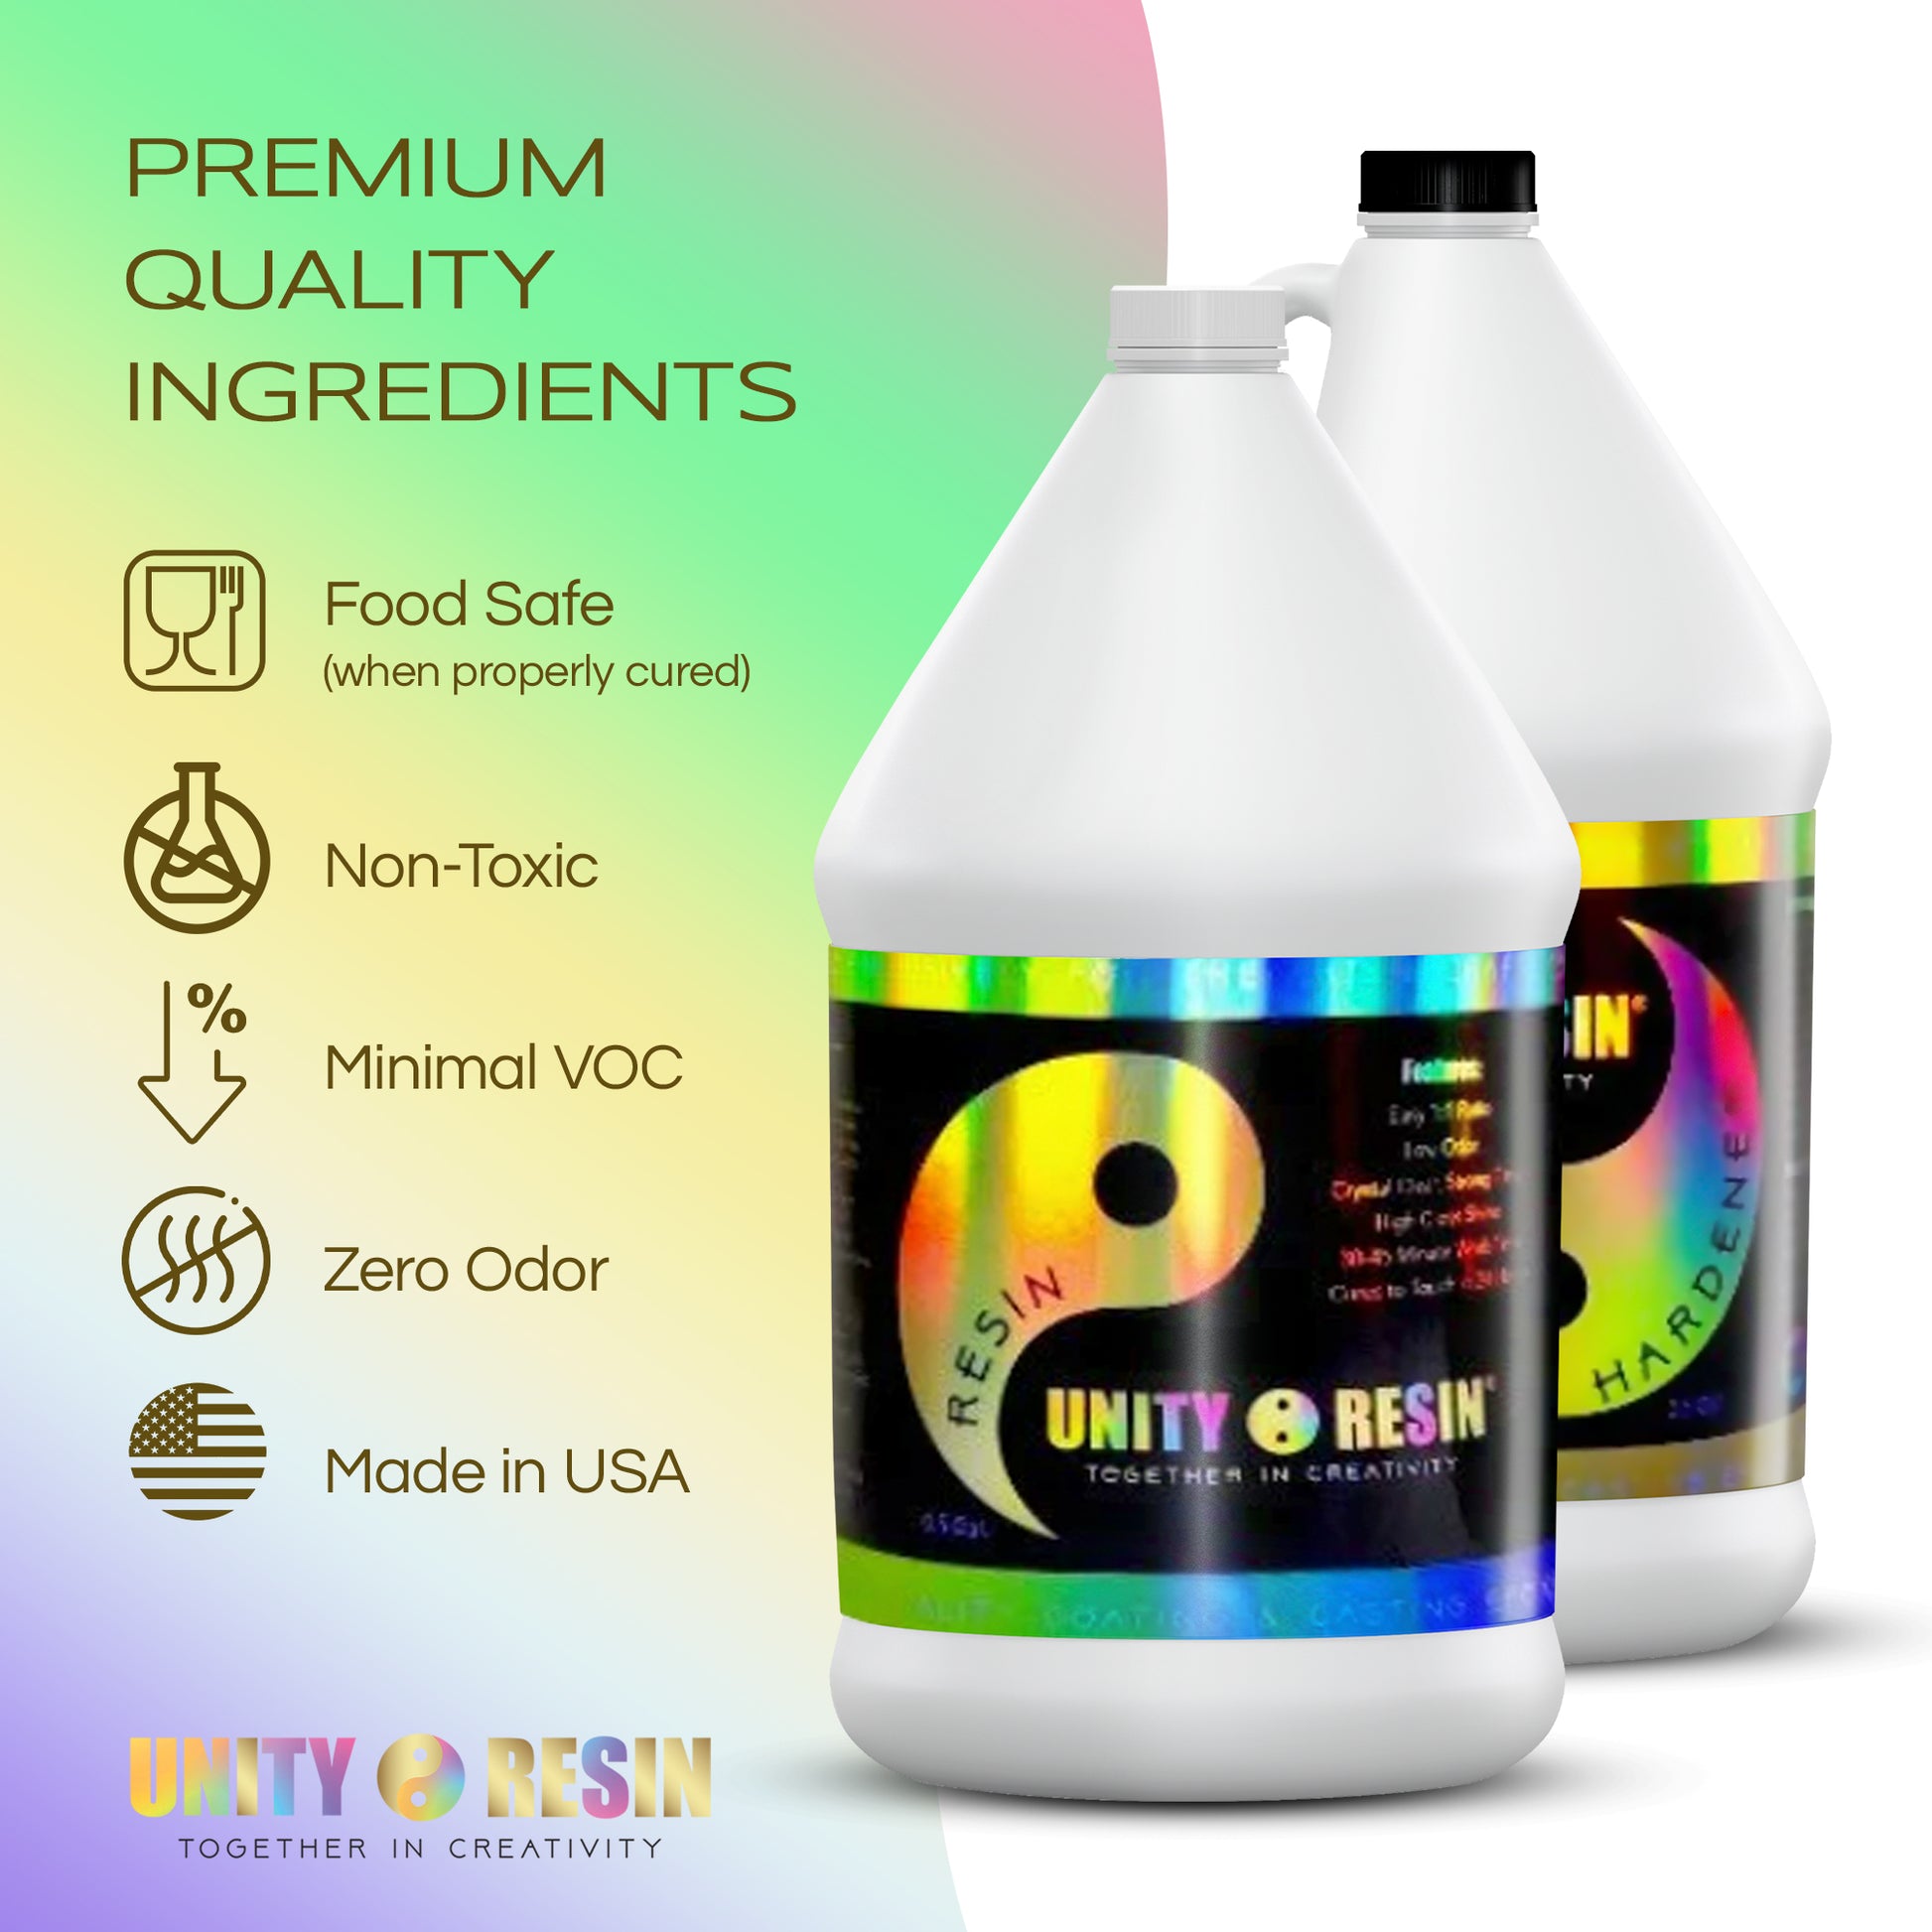 Epoxy Resin For Sale: Epoxy Resin For Crafts – ArtResin